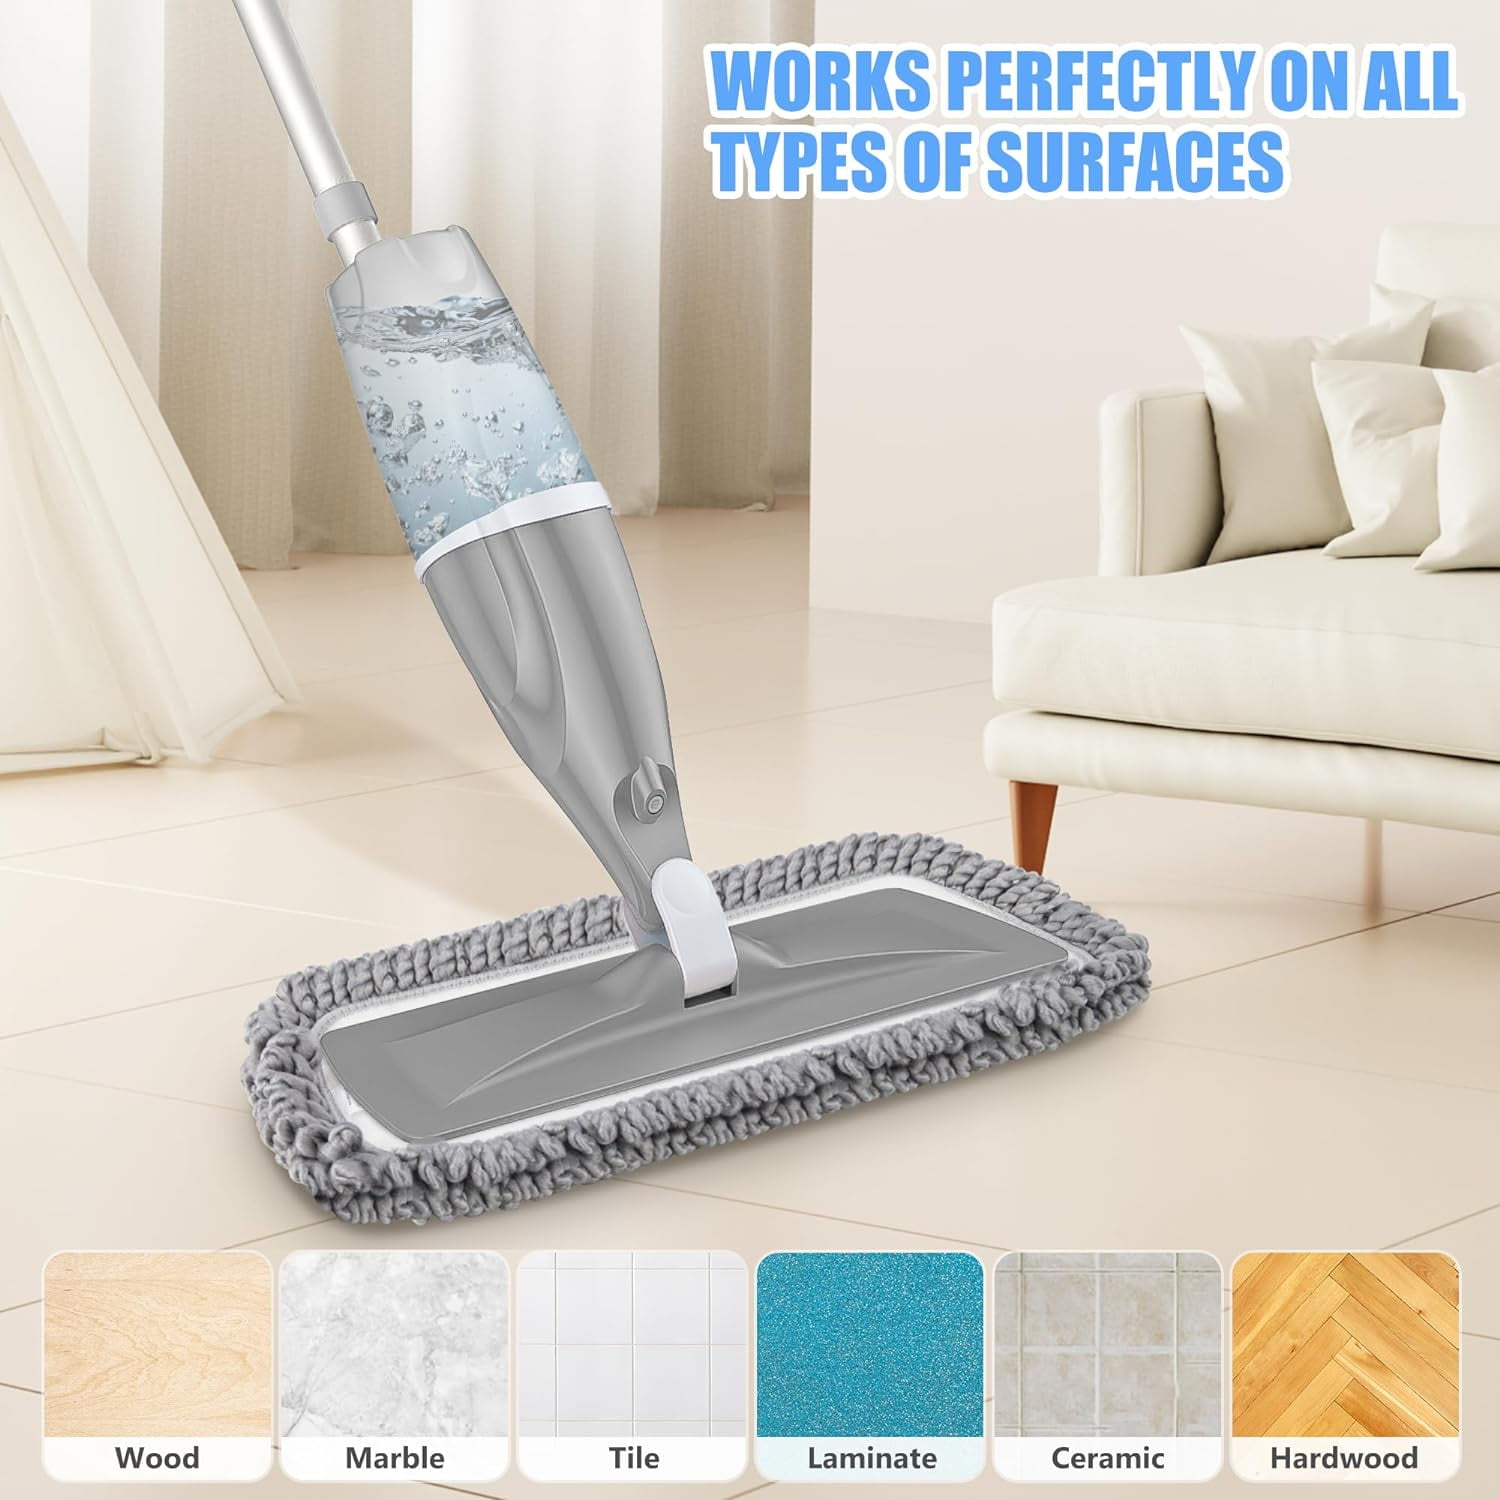 Suptree Microfiber Spray Mop for Floor Cleaning with 3 Washable Pads 1 Refillable Bottle 1 Scraper, Size: 16.81 x 4.69 x 4.49, Black